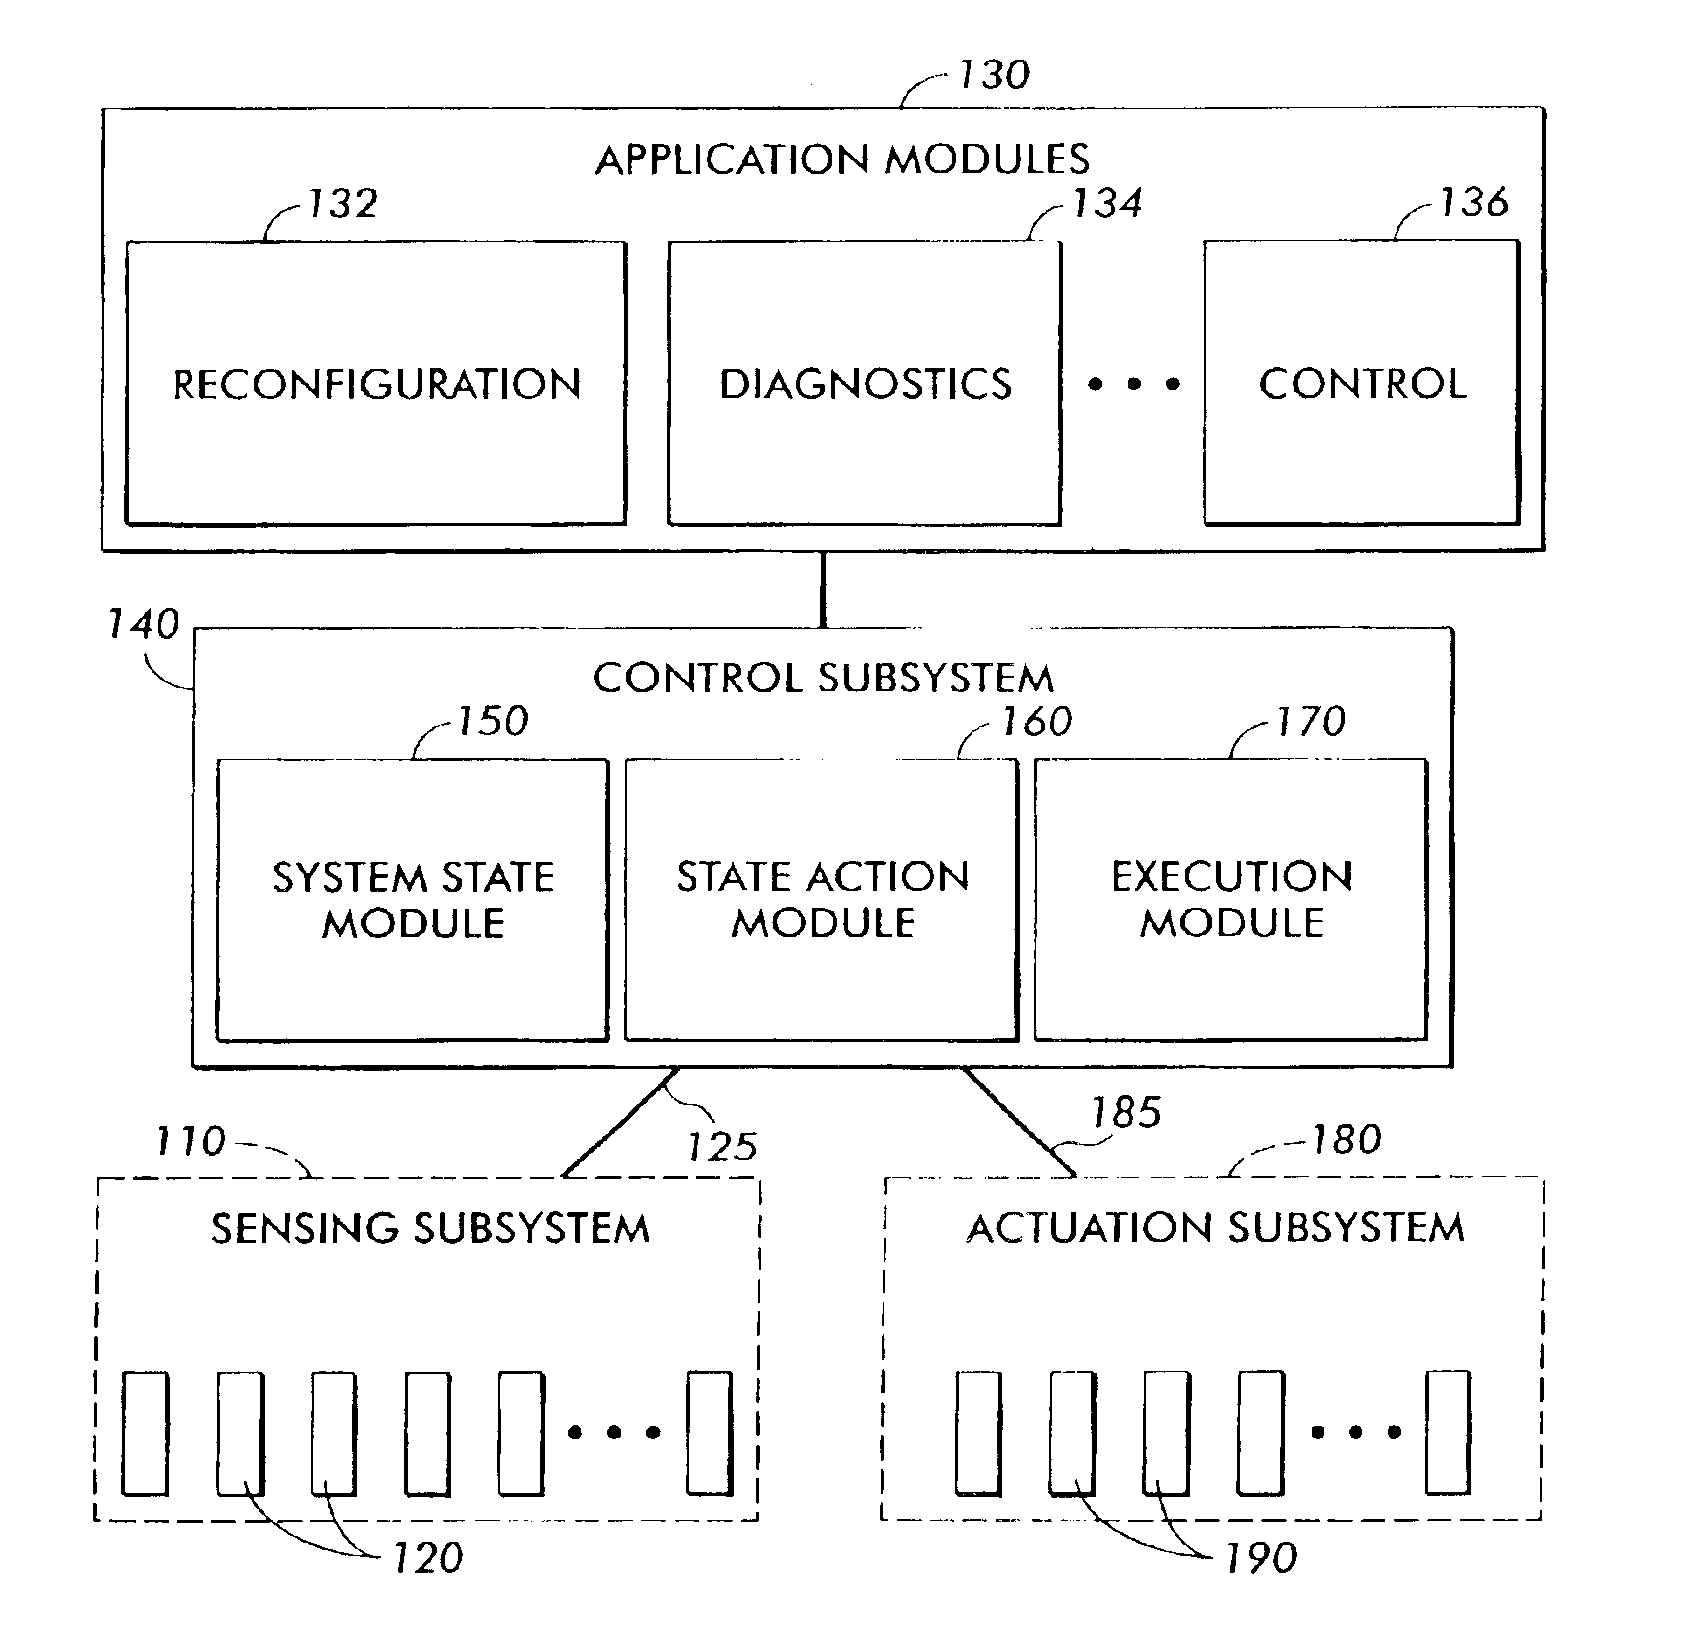 System and method for implementing real-time applications based on stochastic compute time algorithms